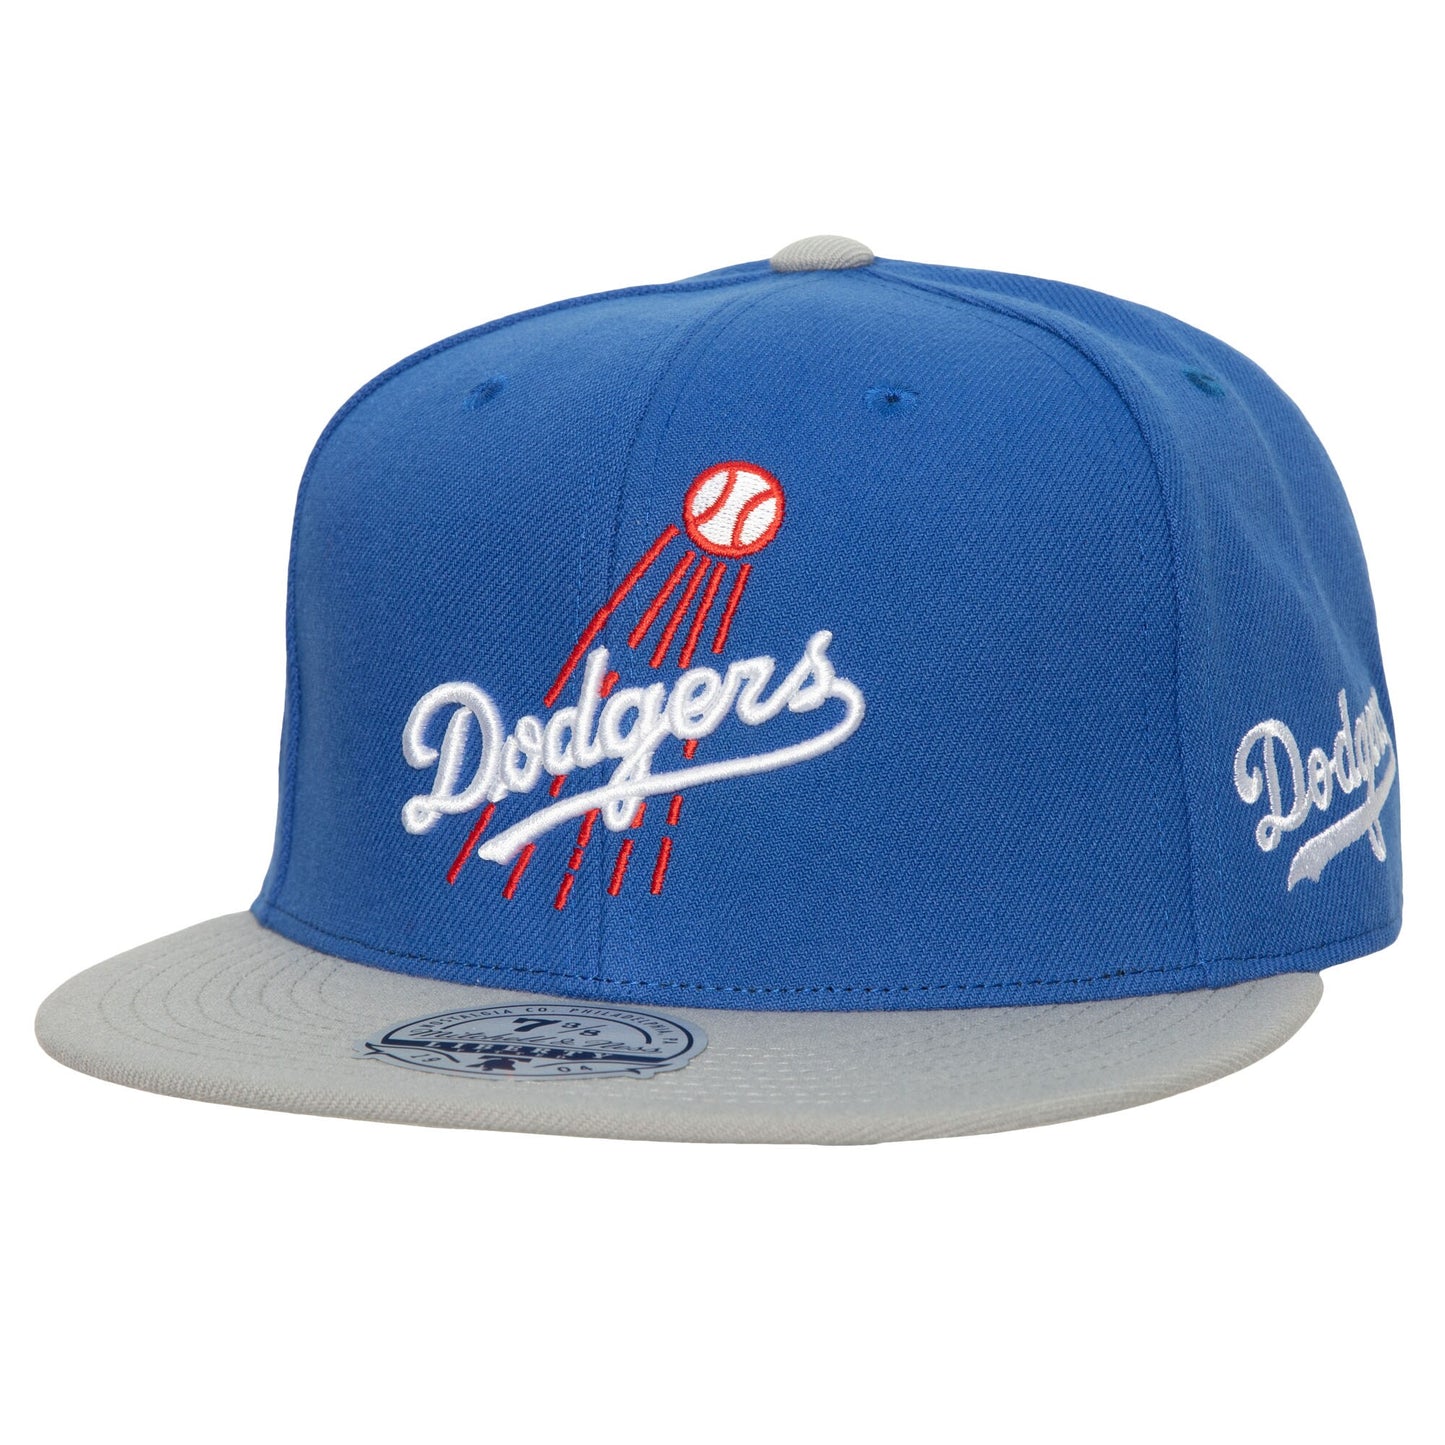 Los Angeles Dodgers Mitchell & Ness Bases Loaded Fitted Hat - Royal/Gray